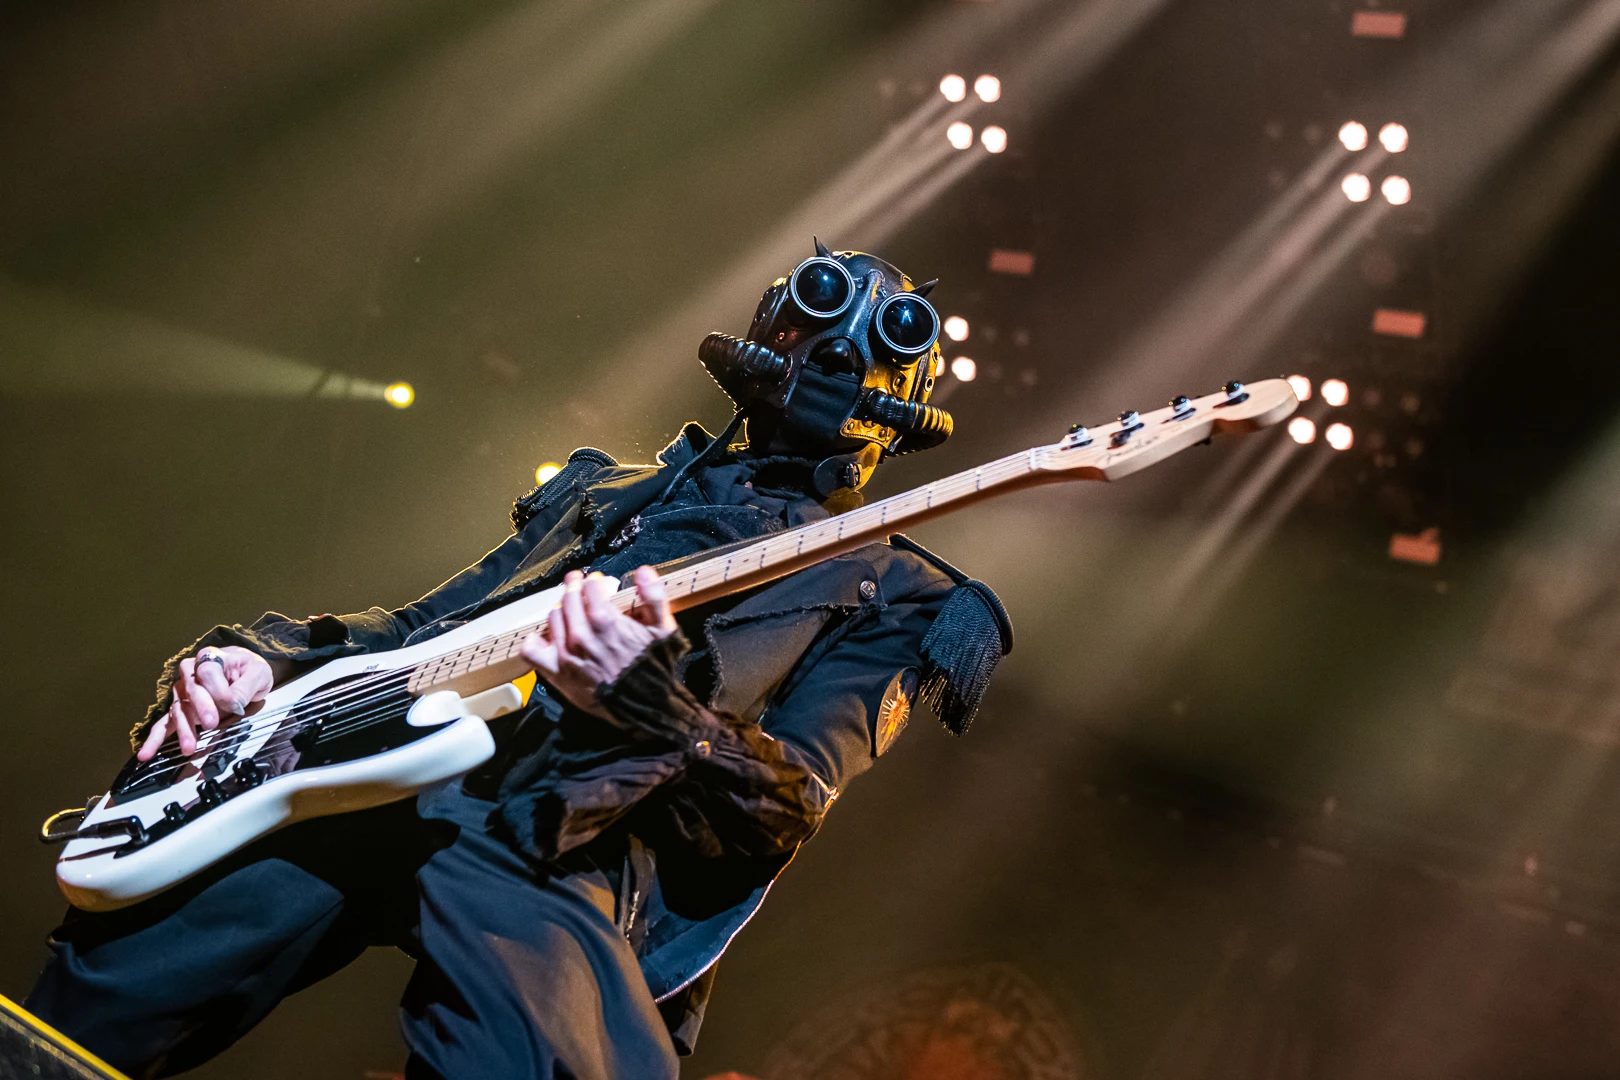 Ghost band: The definitive guide to every member of the Ghost universe